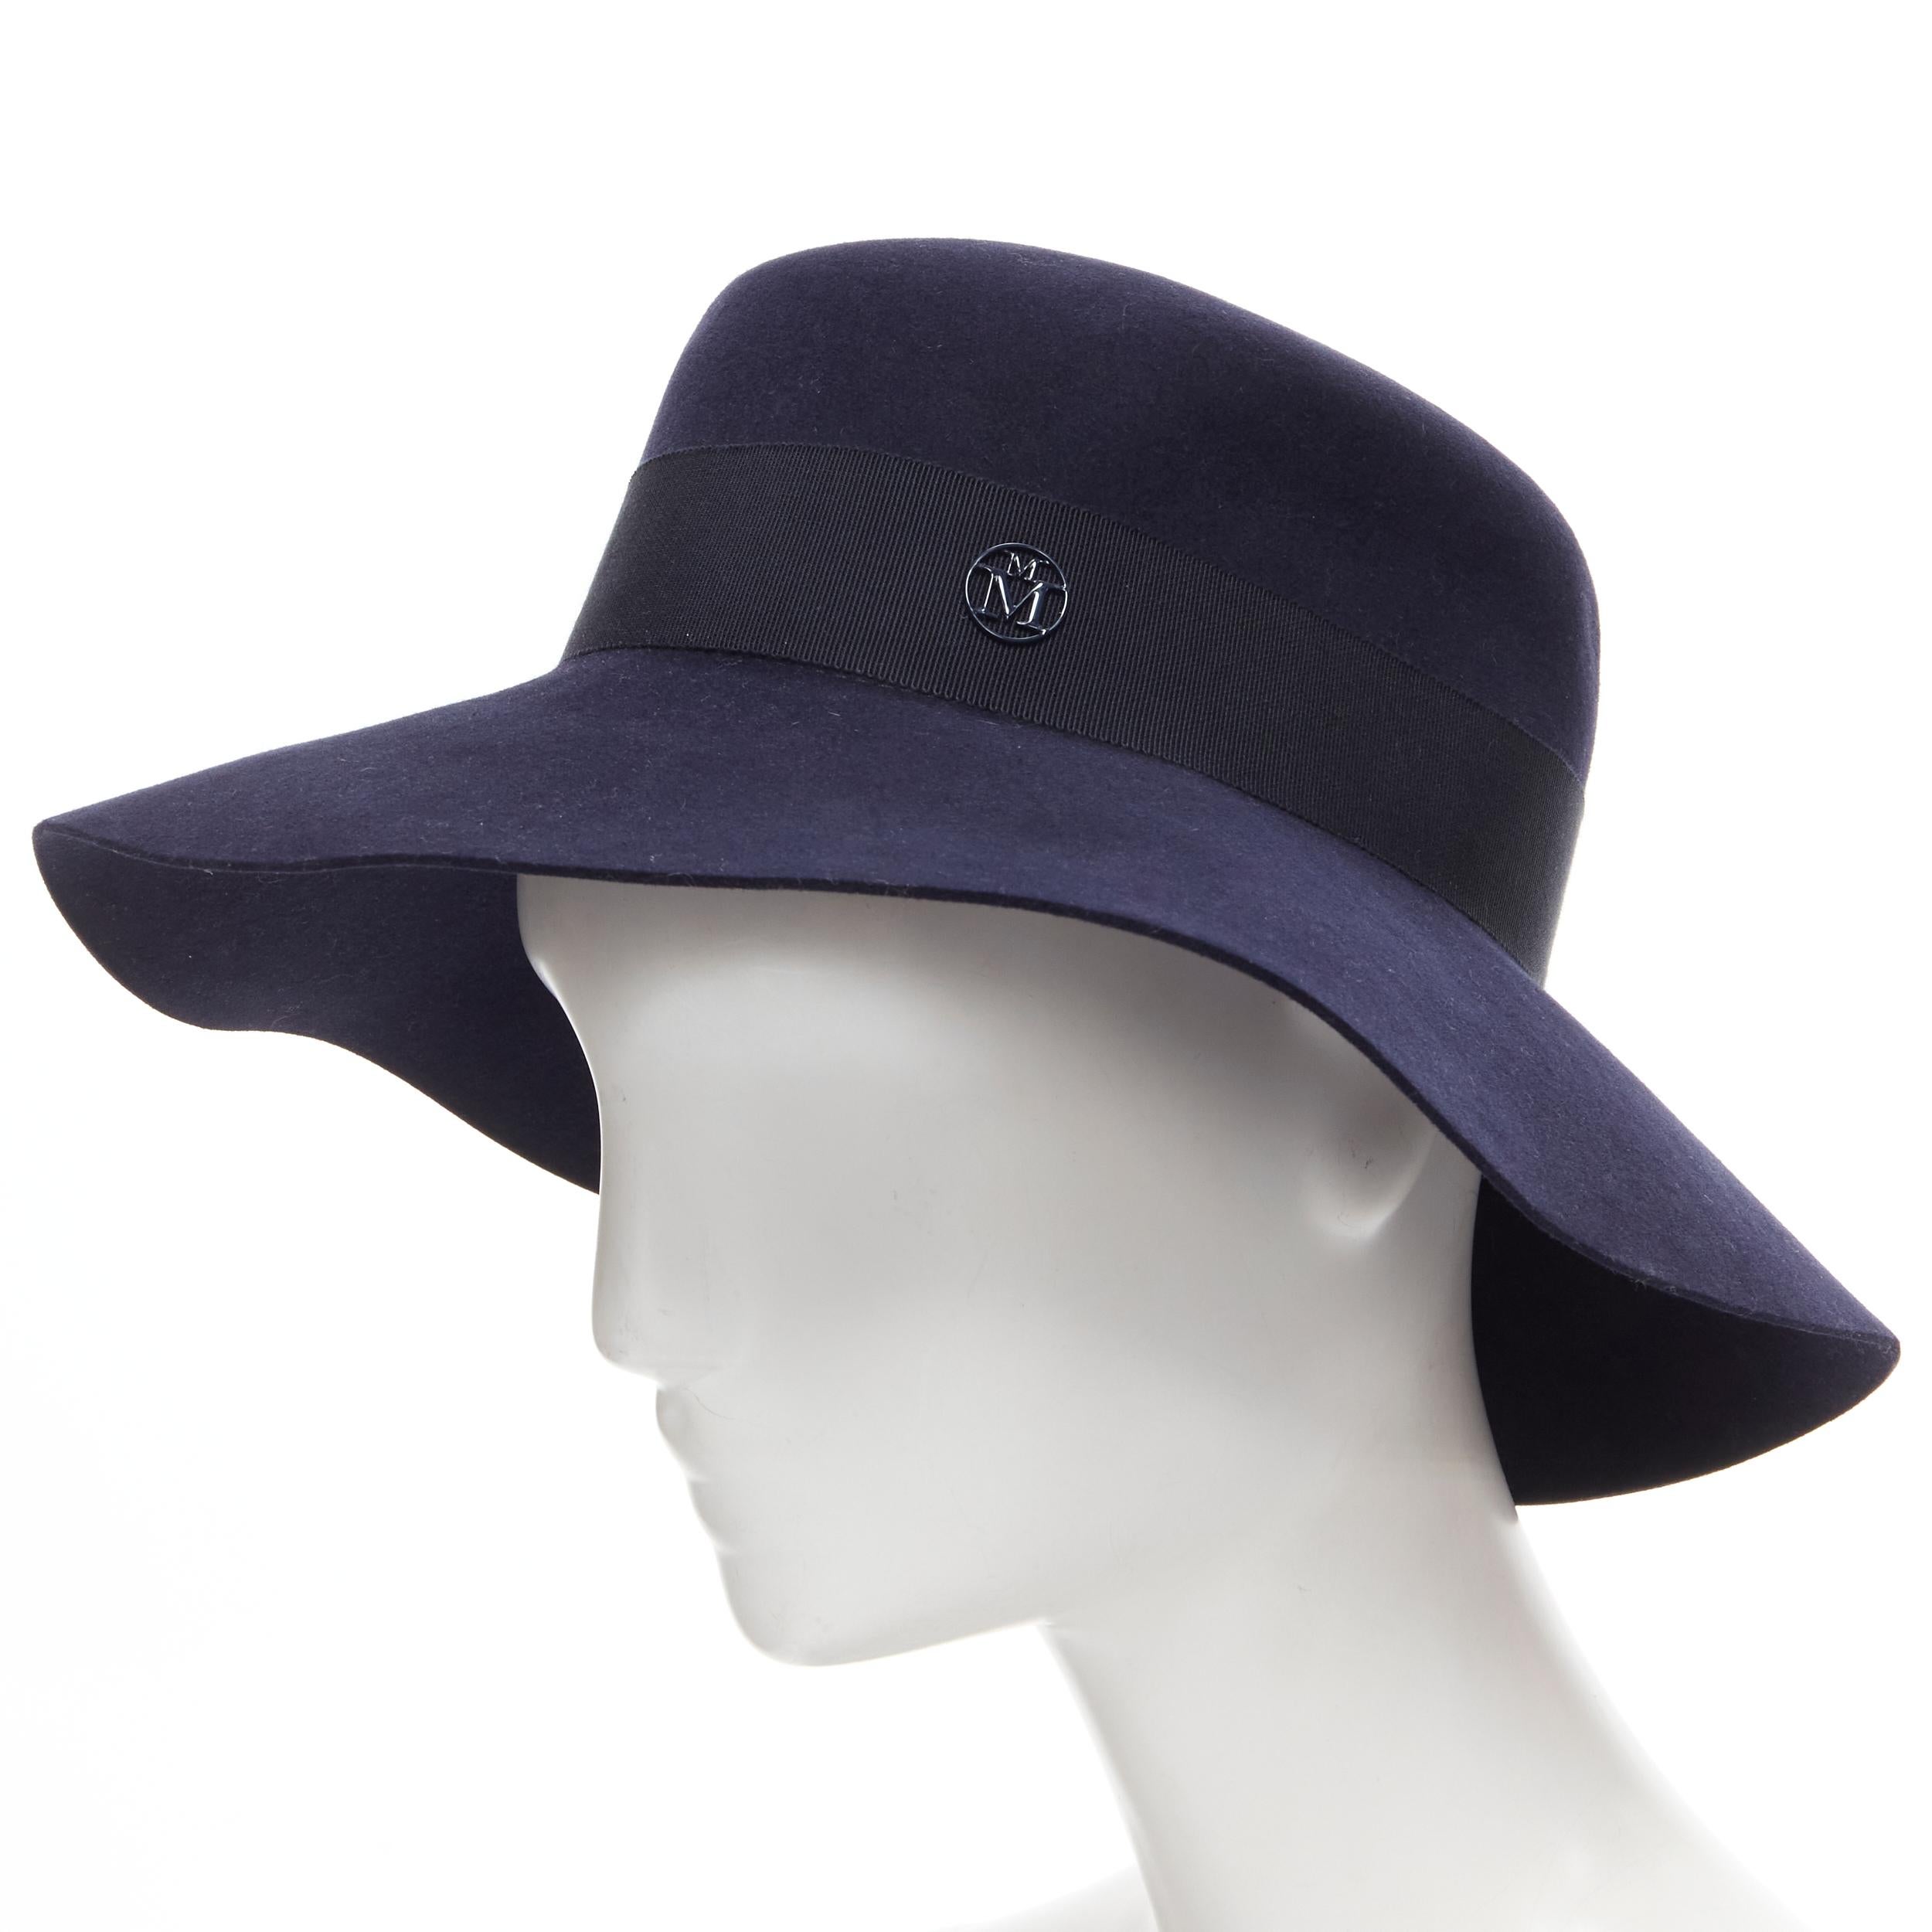 new MAISON MICHEL navy blue black grosgrain M logo detail fedora hat S 56cm 
Reference: MELK/A00157 
Brand: Maison Michel 
Material: Wool 
Color: Navy 
Pattern: Solid 

CONDITION: 
Condition: New with tags. 

SIZING: 
Designer Size: International S